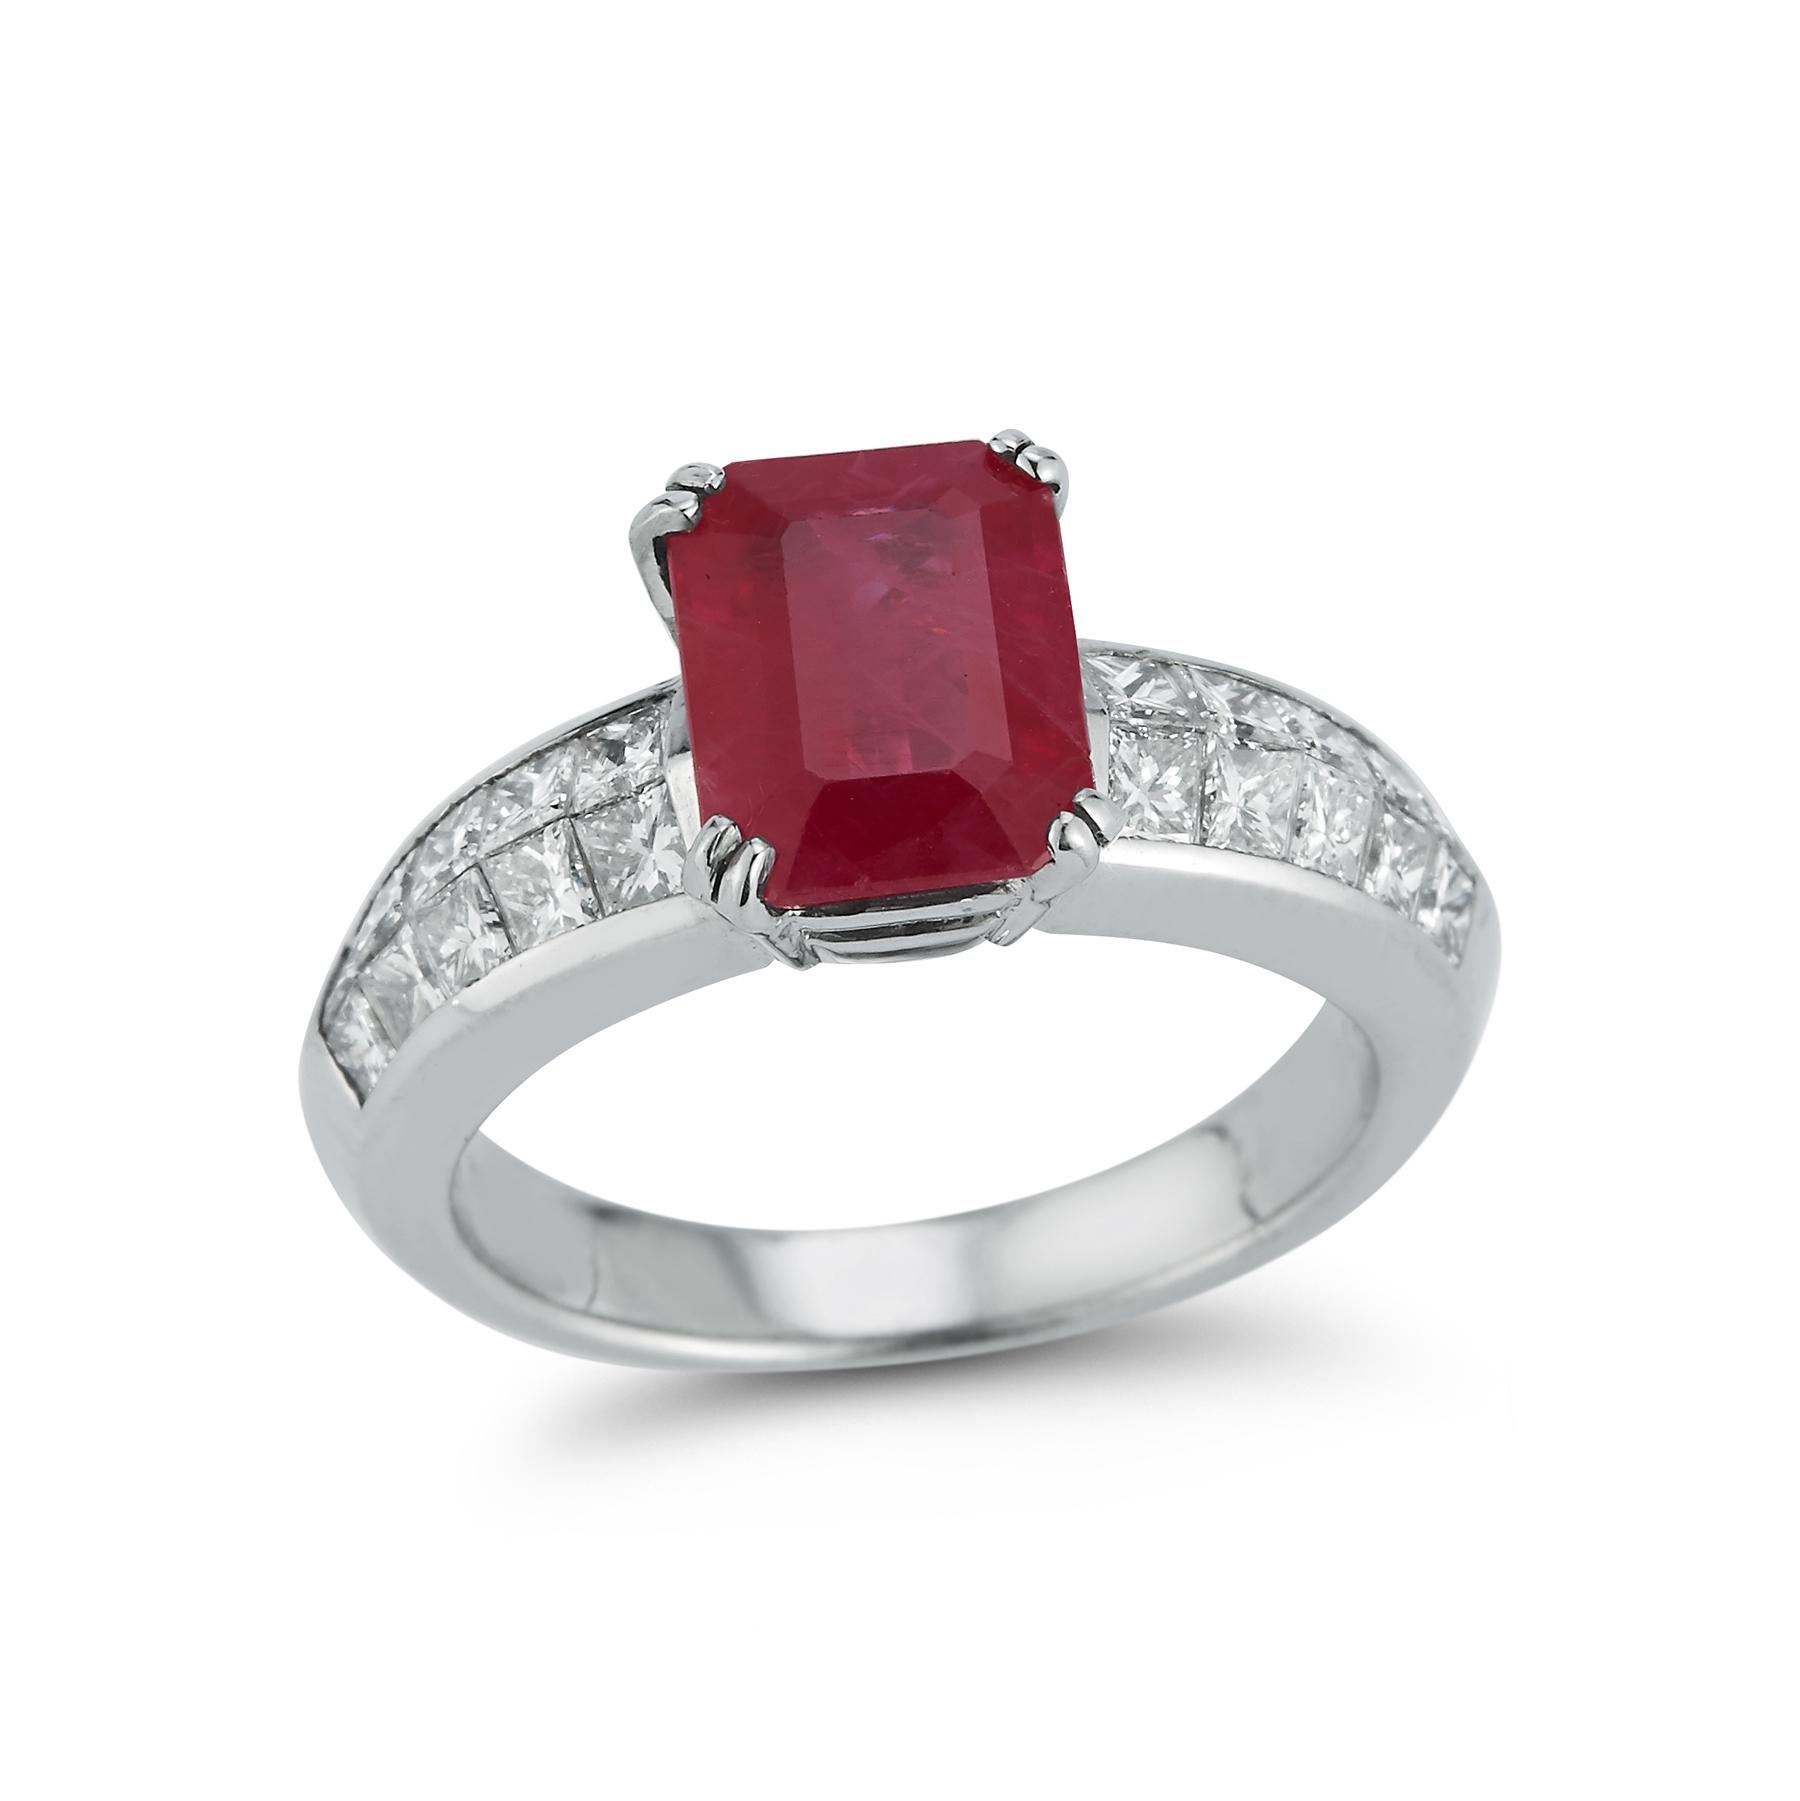 Certified Ruby & Diamond Solitaire Ring

Ruby Weight: approximately 2.50 cts 

Ring Size: 6

Re sizable free of charge

Gold Type: 18K White Gold 